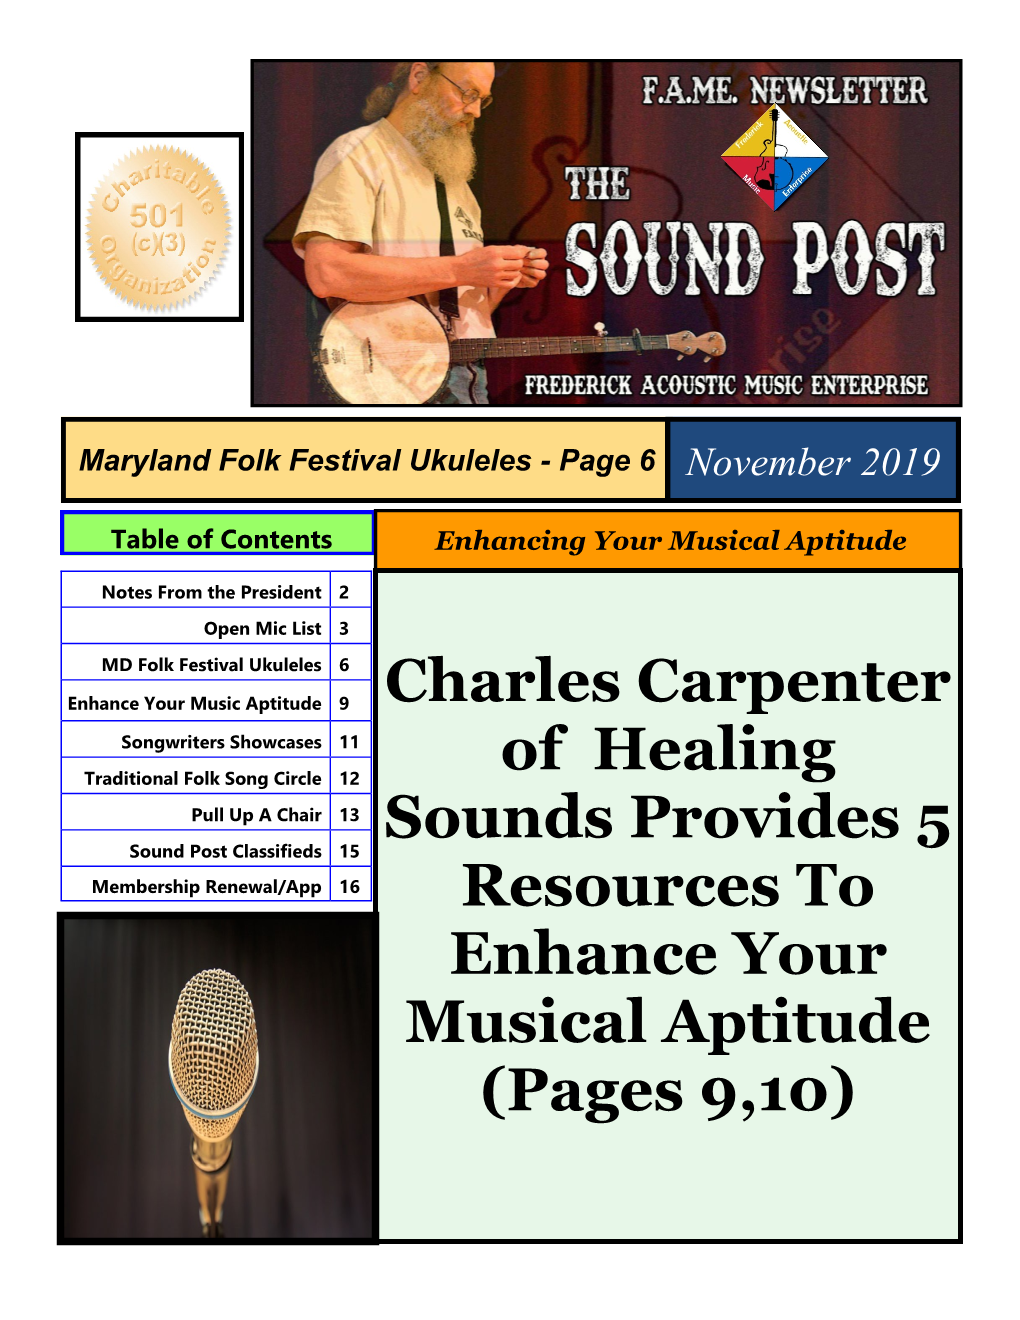 Charles Carpenter of Healing Sounds Provides 5 Resources to Enhance Your Musical Aptitude